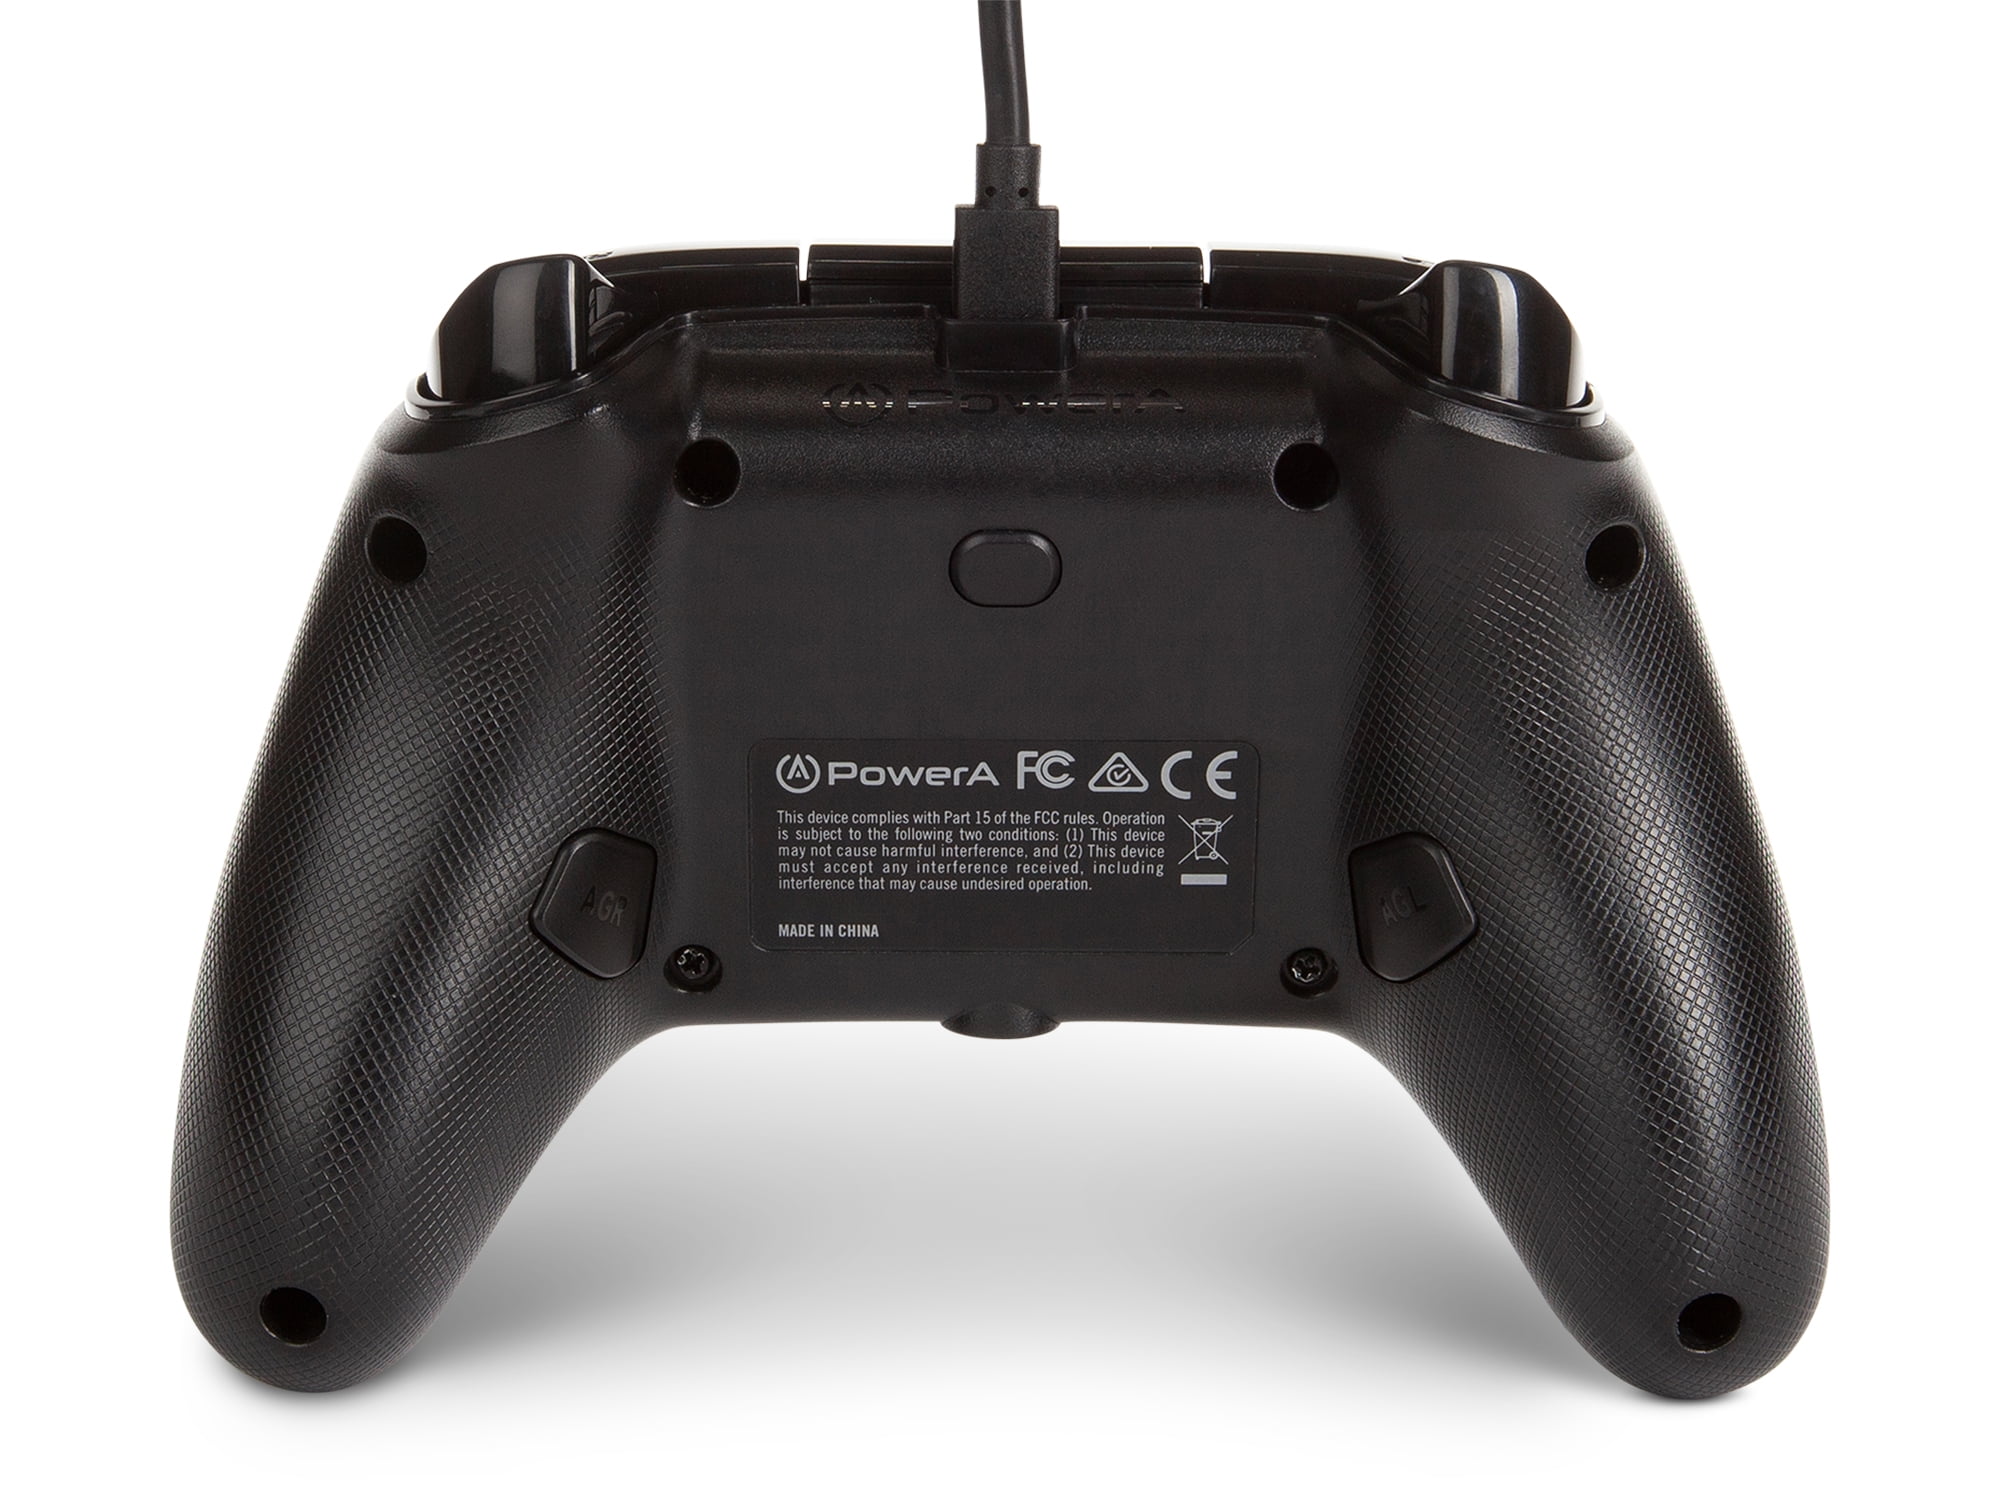  PowerA Wired Officially Licensed Controller For Xbox One, S, Xbox  One X & Windows 10 - Black : Video Games